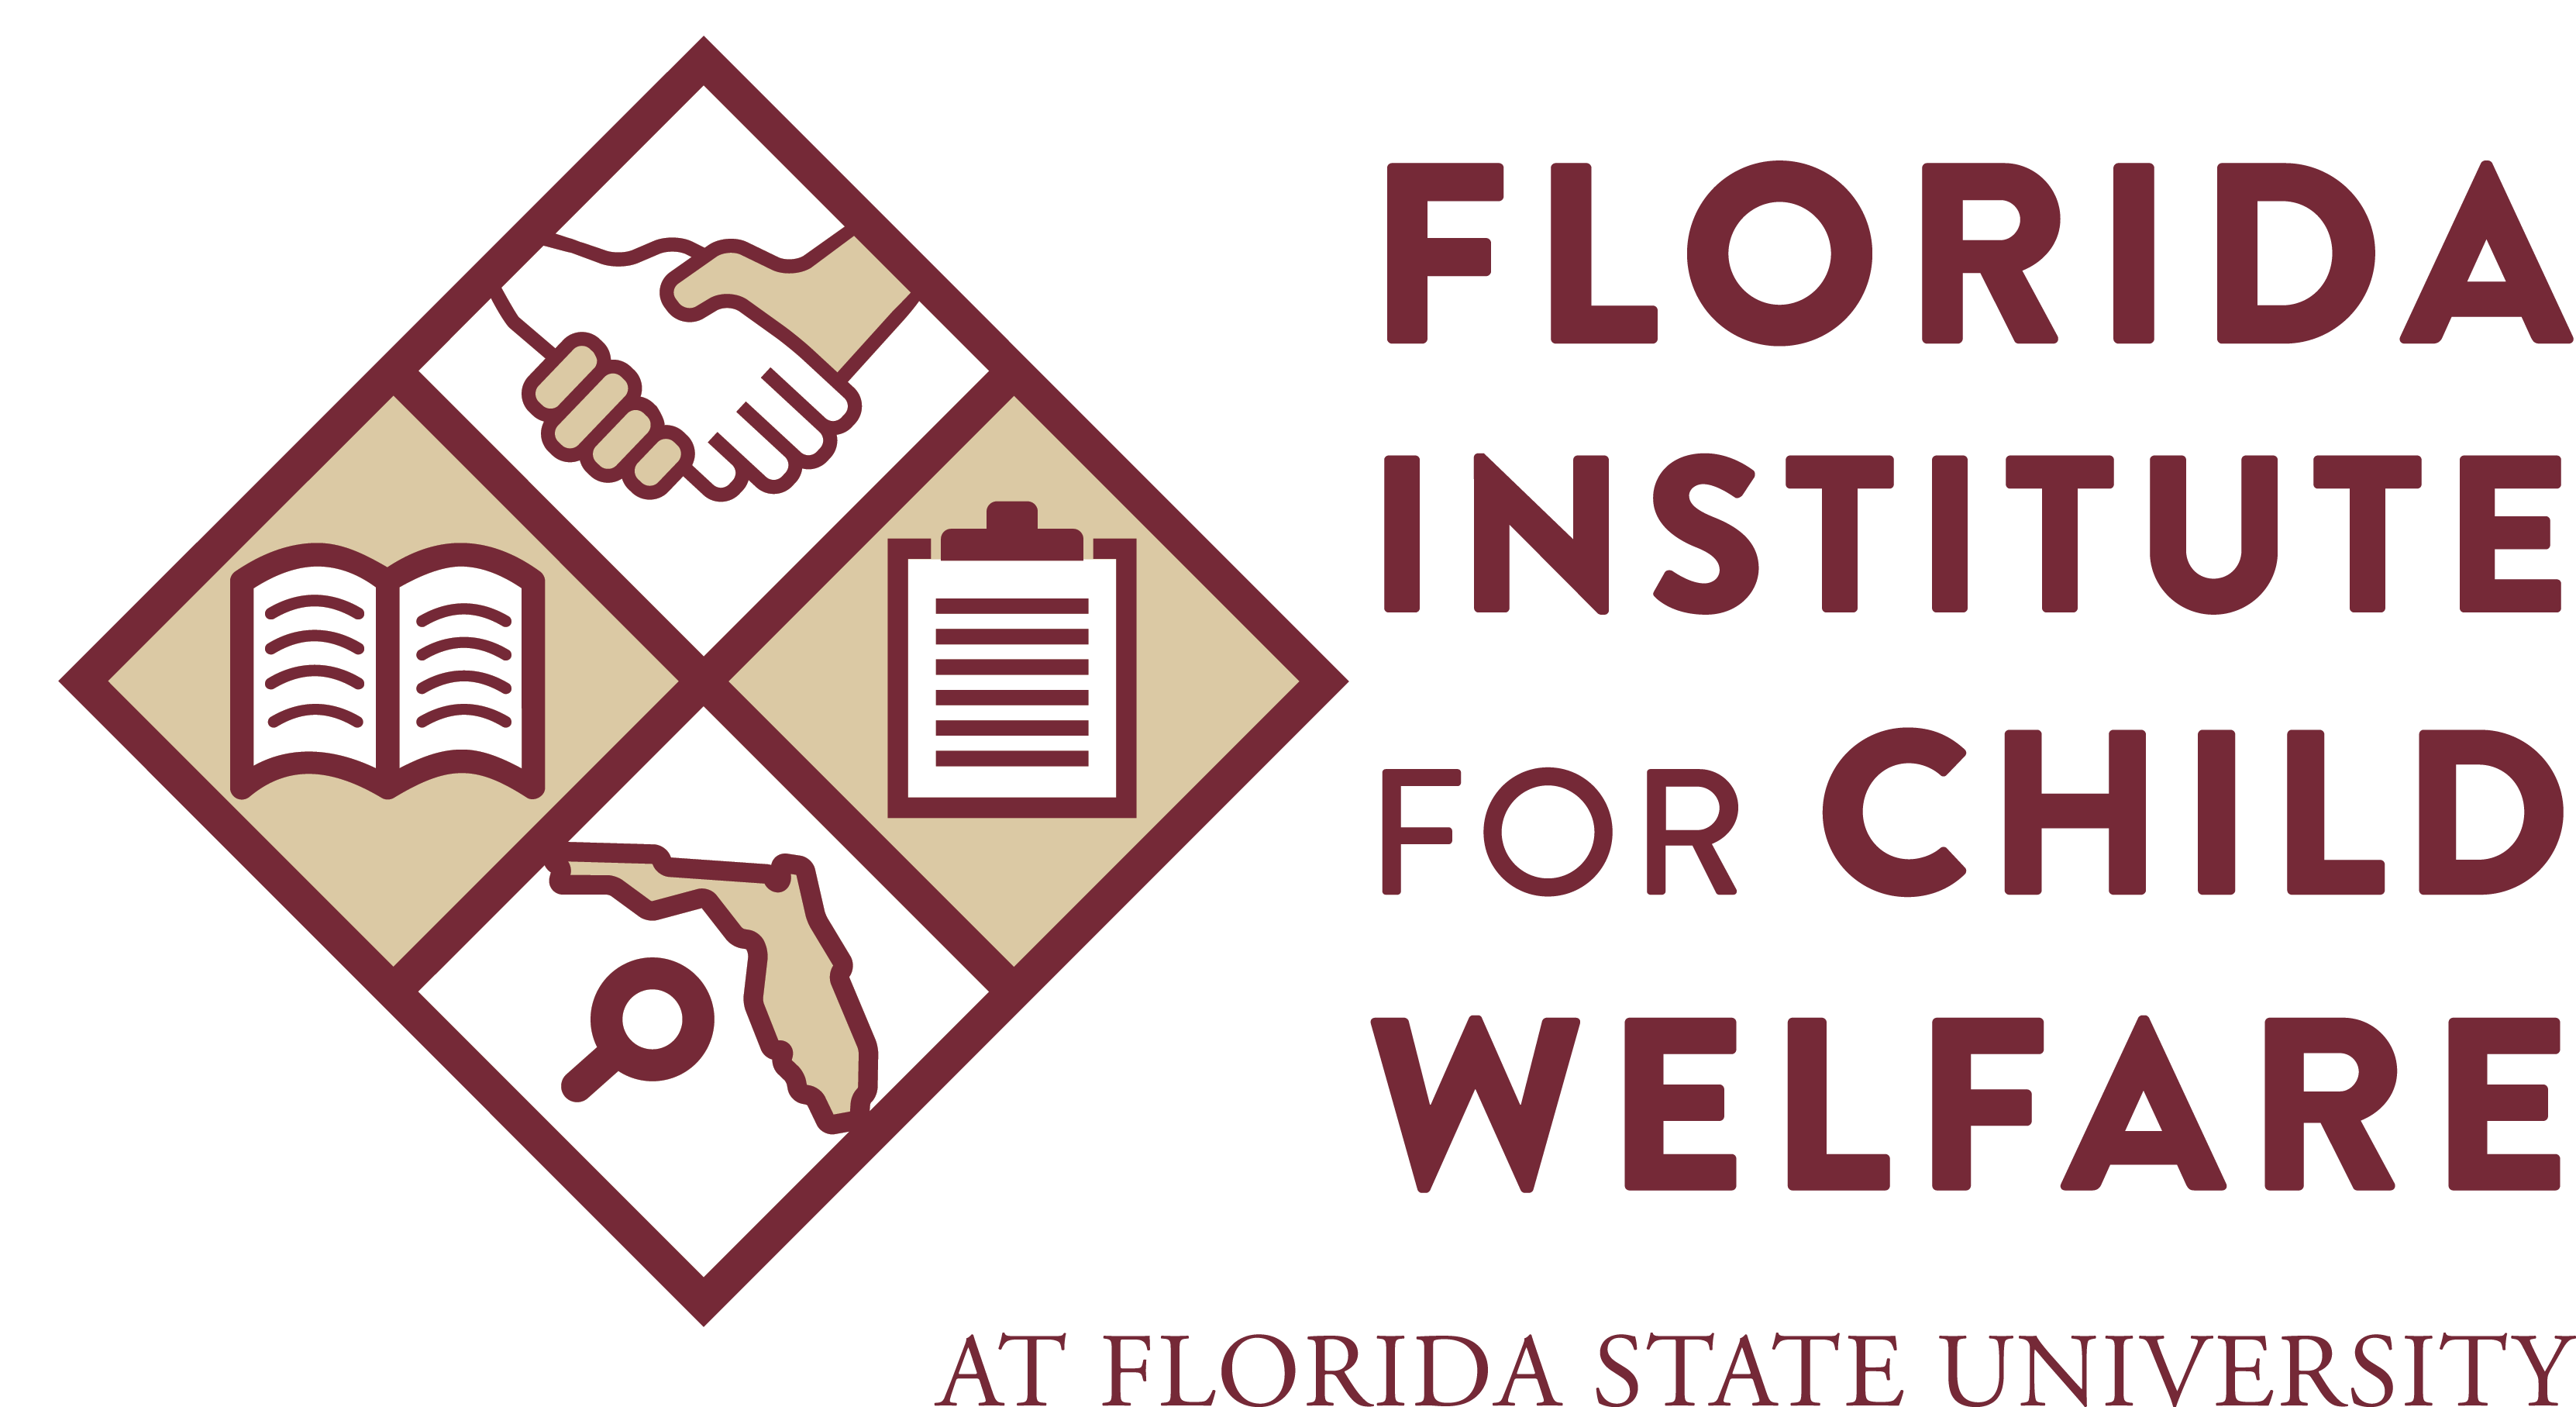 "Logo for the Florida Institute for Child Welfare at Florida State University with a logo of a clip board, open book, shaking hands and the state of Florida "